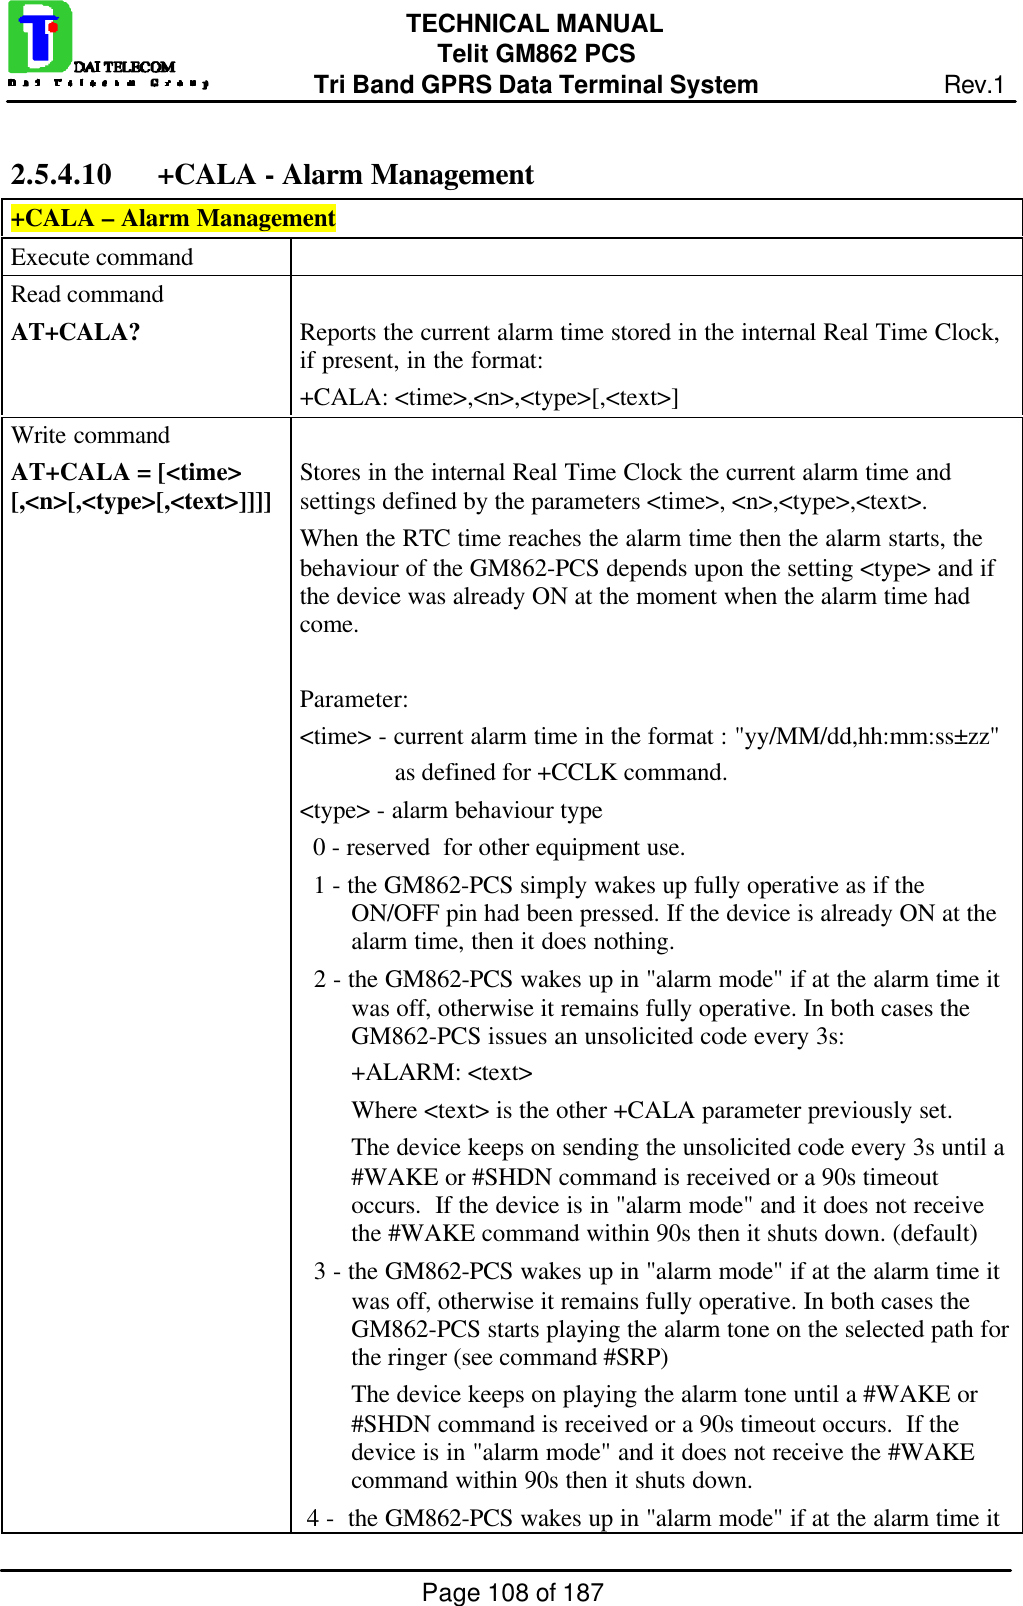 Page 108 of 187TECHNICAL MANUALTelit GM862 PCSTri Band GPRS Data Terminal System Rev.12.5.4.10 +CALA - Alarm Management+CALA – Alarm ManagementExecute commandRead commandAT+CALA? Reports the current alarm time stored in the internal Real Time Clock,if present, in the format:+CALA: &lt;time&gt;,&lt;n&gt;,&lt;type&gt;[,&lt;text&gt;]Write commandAT+CALA = [&lt;time&gt;[,&lt;n&gt;[,&lt;type&gt;[,&lt;text&gt;]]]] Stores in the internal Real Time Clock the current alarm time andsettings defined by the parameters &lt;time&gt;, &lt;n&gt;,&lt;type&gt;,&lt;text&gt;.When the RTC time reaches the alarm time then the alarm starts, thebehaviour of the GM862-PCS depends upon the setting &lt;type&gt; and ifthe device was already ON at the moment when the alarm time hadcome.Parameter:&lt;time&gt; - current alarm time in the format : &quot;yy/MM/dd,hh:mm:ss±zz&quot;               as defined for +CCLK command.&lt;type&gt; - alarm behaviour type  0 - reserved  for other equipment use.  1 - the GM862-PCS simply wakes up fully operative as if theON/OFF pin had been pressed. If the device is already ON at thealarm time, then it does nothing.  2 - the GM862-PCS wakes up in &quot;alarm mode&quot; if at the alarm time itwas off, otherwise it remains fully operative. In both cases theGM862-PCS issues an unsolicited code every 3s:+ALARM: &lt;text&gt;Where &lt;text&gt; is the other +CALA parameter previously set.The device keeps on sending the unsolicited code every 3s until a#WAKE or #SHDN command is received or a 90s timeoutoccurs.  If the device is in &quot;alarm mode&quot; and it does not receivethe #WAKE command within 90s then it shuts down. (default)  3 - the GM862-PCS wakes up in &quot;alarm mode&quot; if at the alarm time itwas off, otherwise it remains fully operative. In both cases theGM862-PCS starts playing the alarm tone on the selected path forthe ringer (see command #SRP)The device keeps on playing the alarm tone until a #WAKE or#SHDN command is received or a 90s timeout occurs.  If thedevice is in &quot;alarm mode&quot; and it does not receive the #WAKEcommand within 90s then it shuts down. 4 -  the GM862-PCS wakes up in &quot;alarm mode&quot; if at the alarm time it